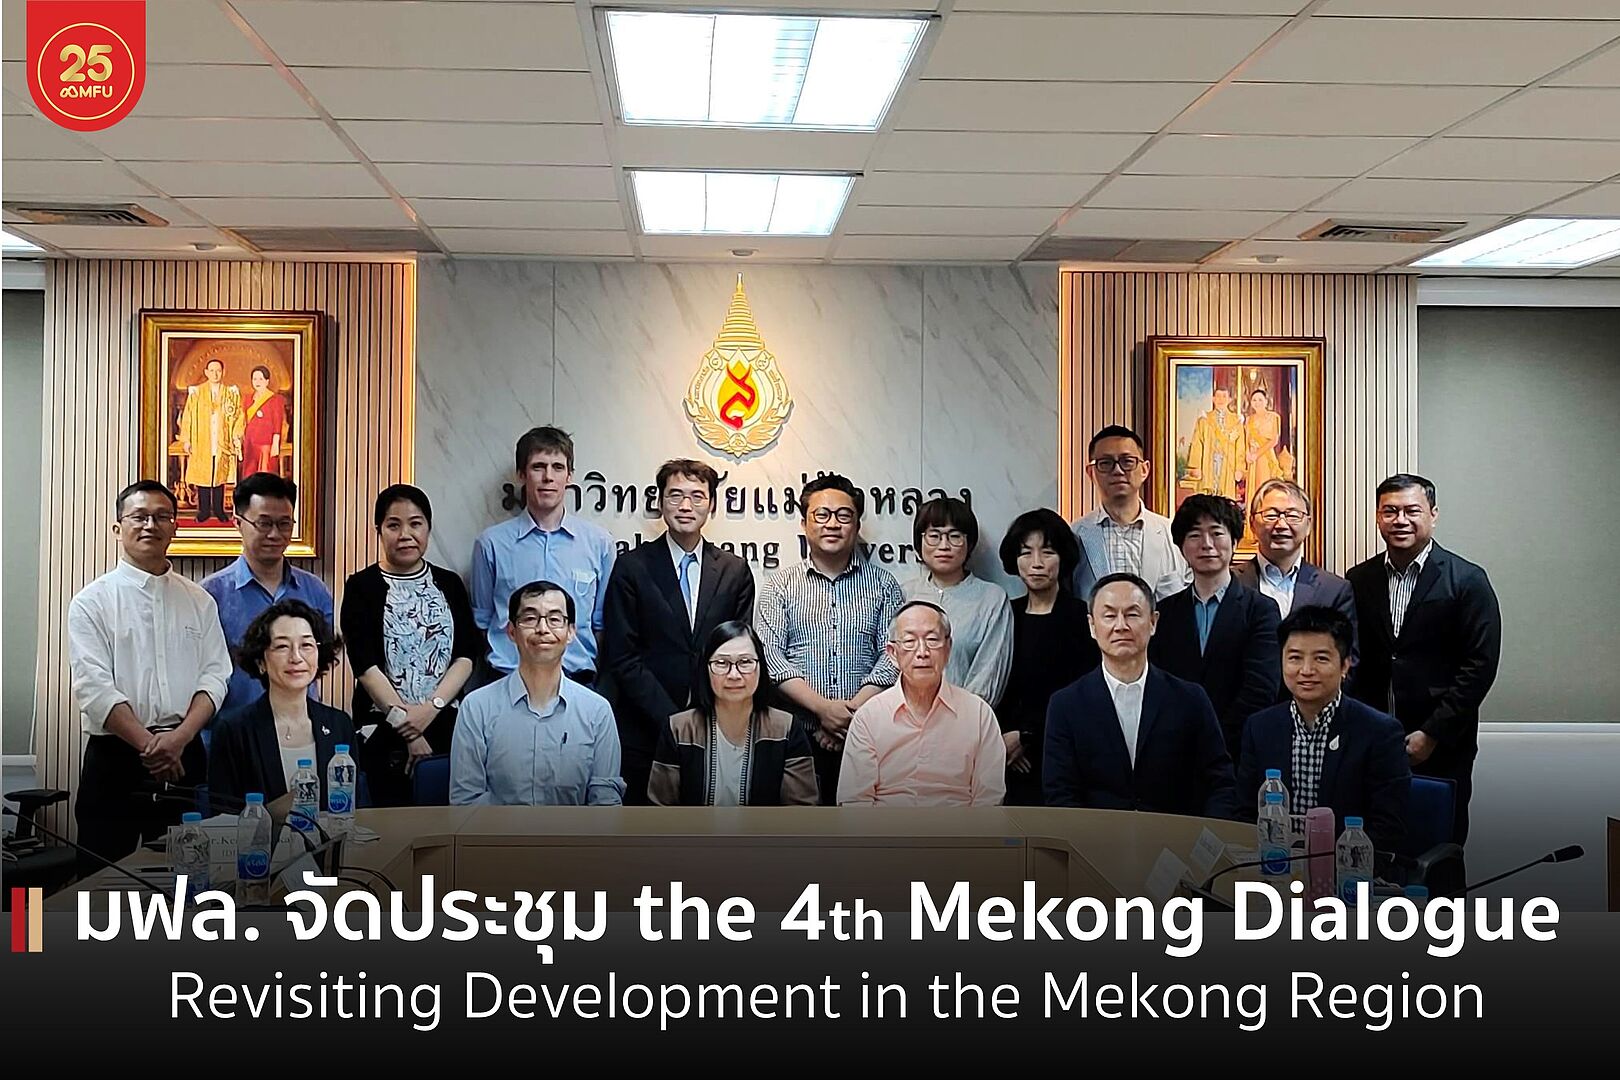 the 4th Mekong Dialogue on “Water, Food, Energy, and Climate Nexus: Revisiting Development of the Mekong Region”